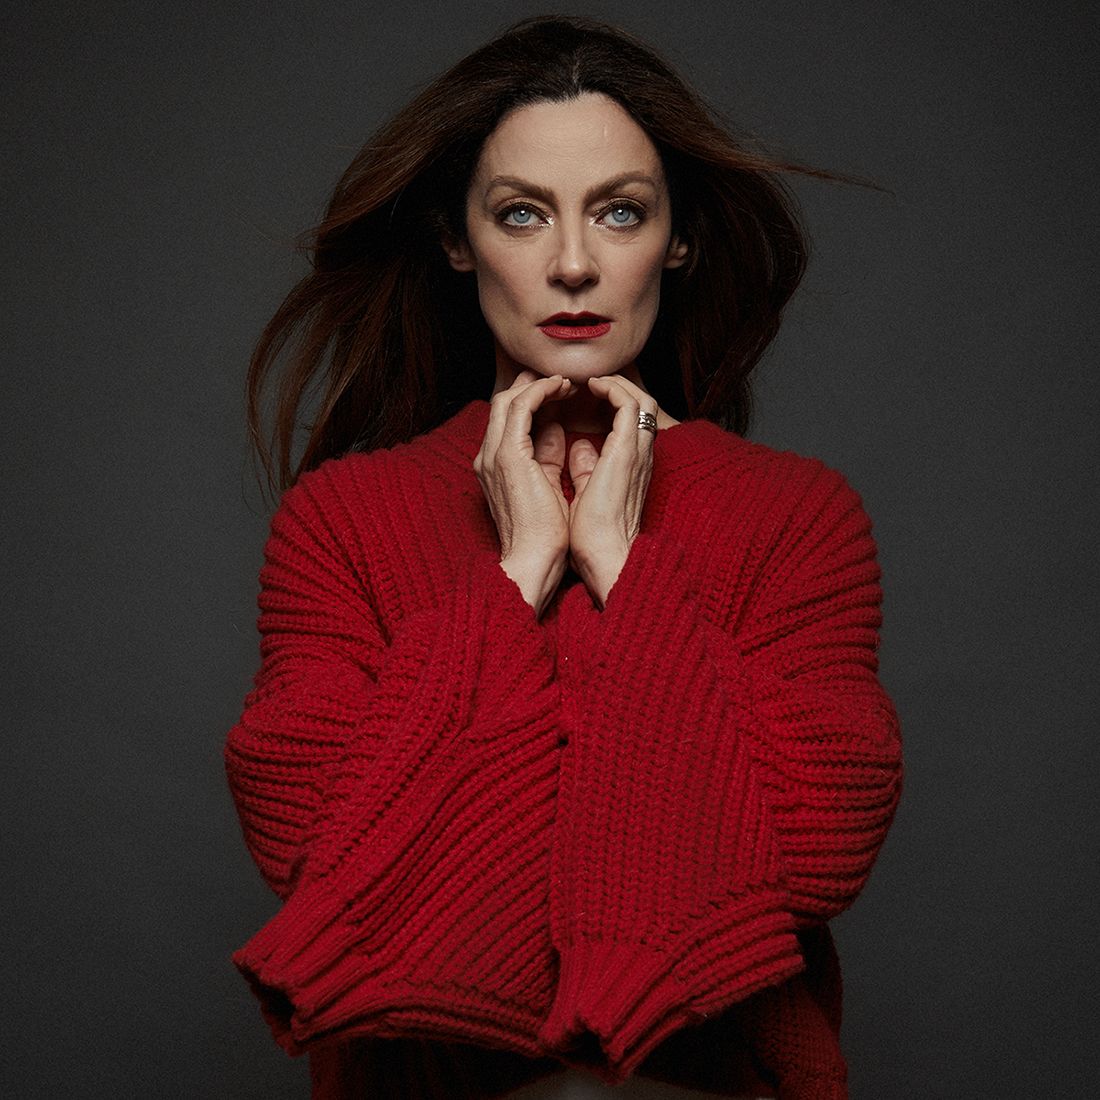 Michelle Gomez talks to T&C magazine about season 2 of Netflix's Chilling Adventures of Sabrina.